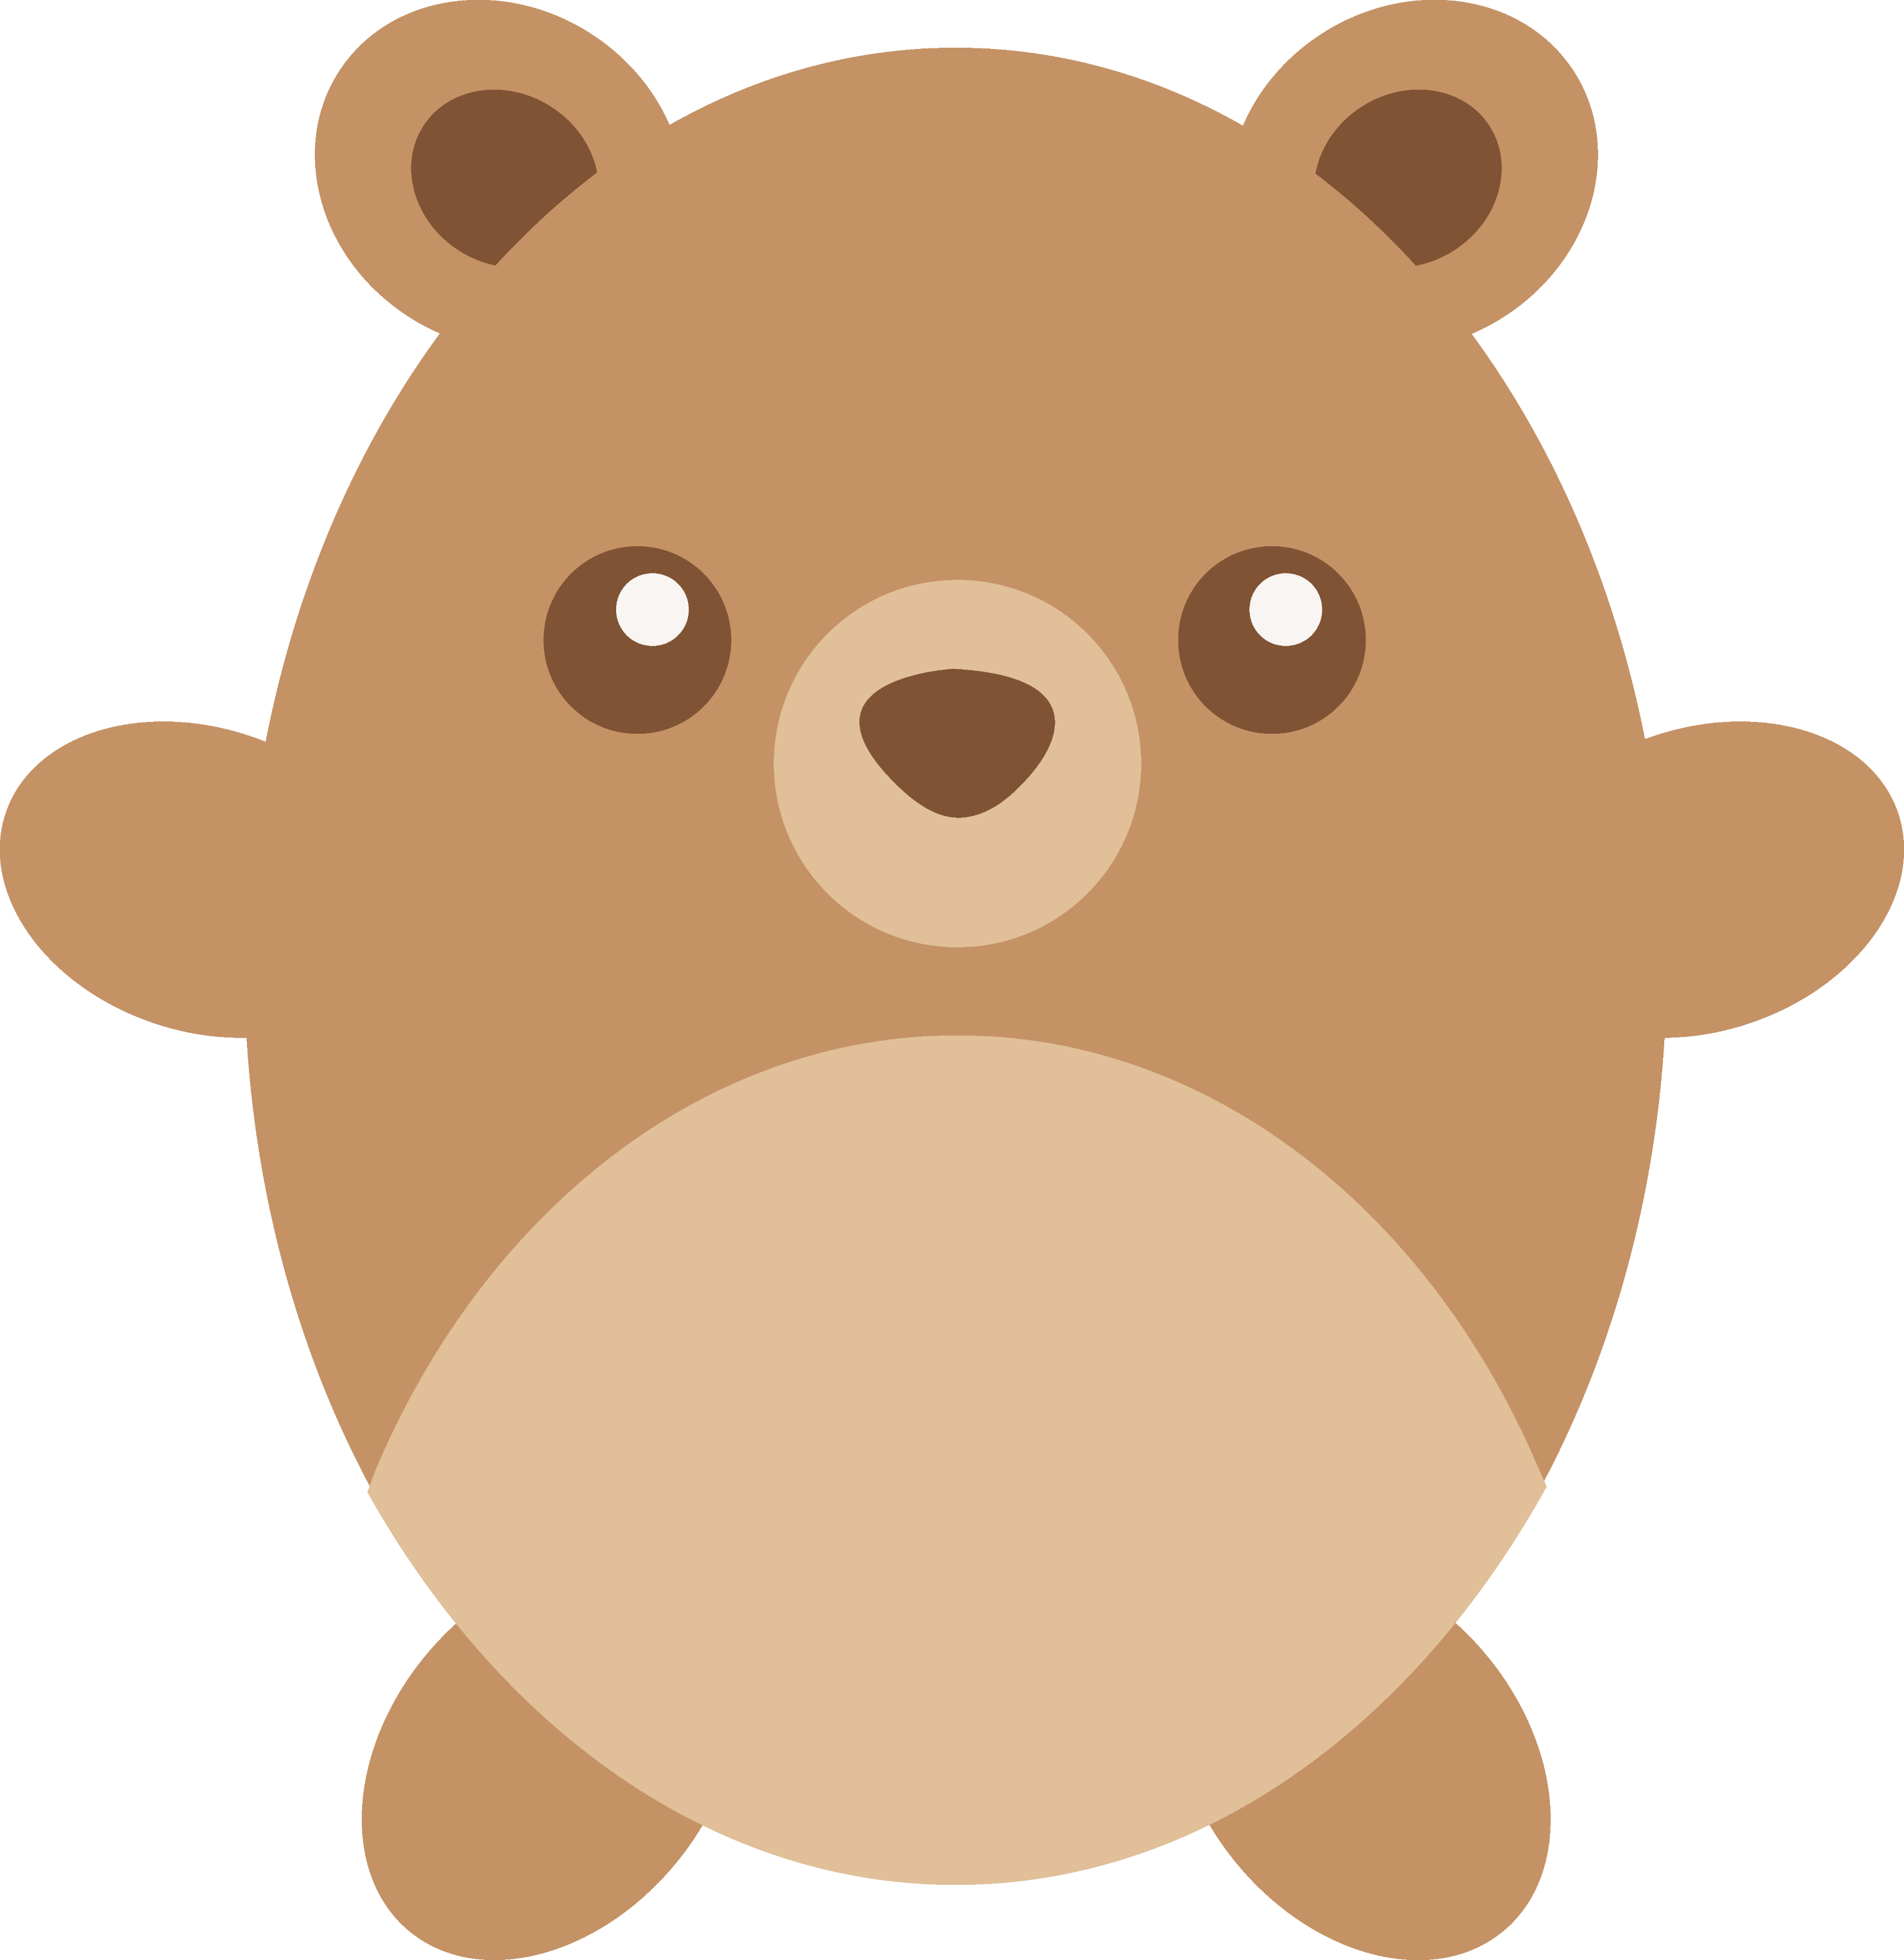 free clipart images teddy bear - photo #50